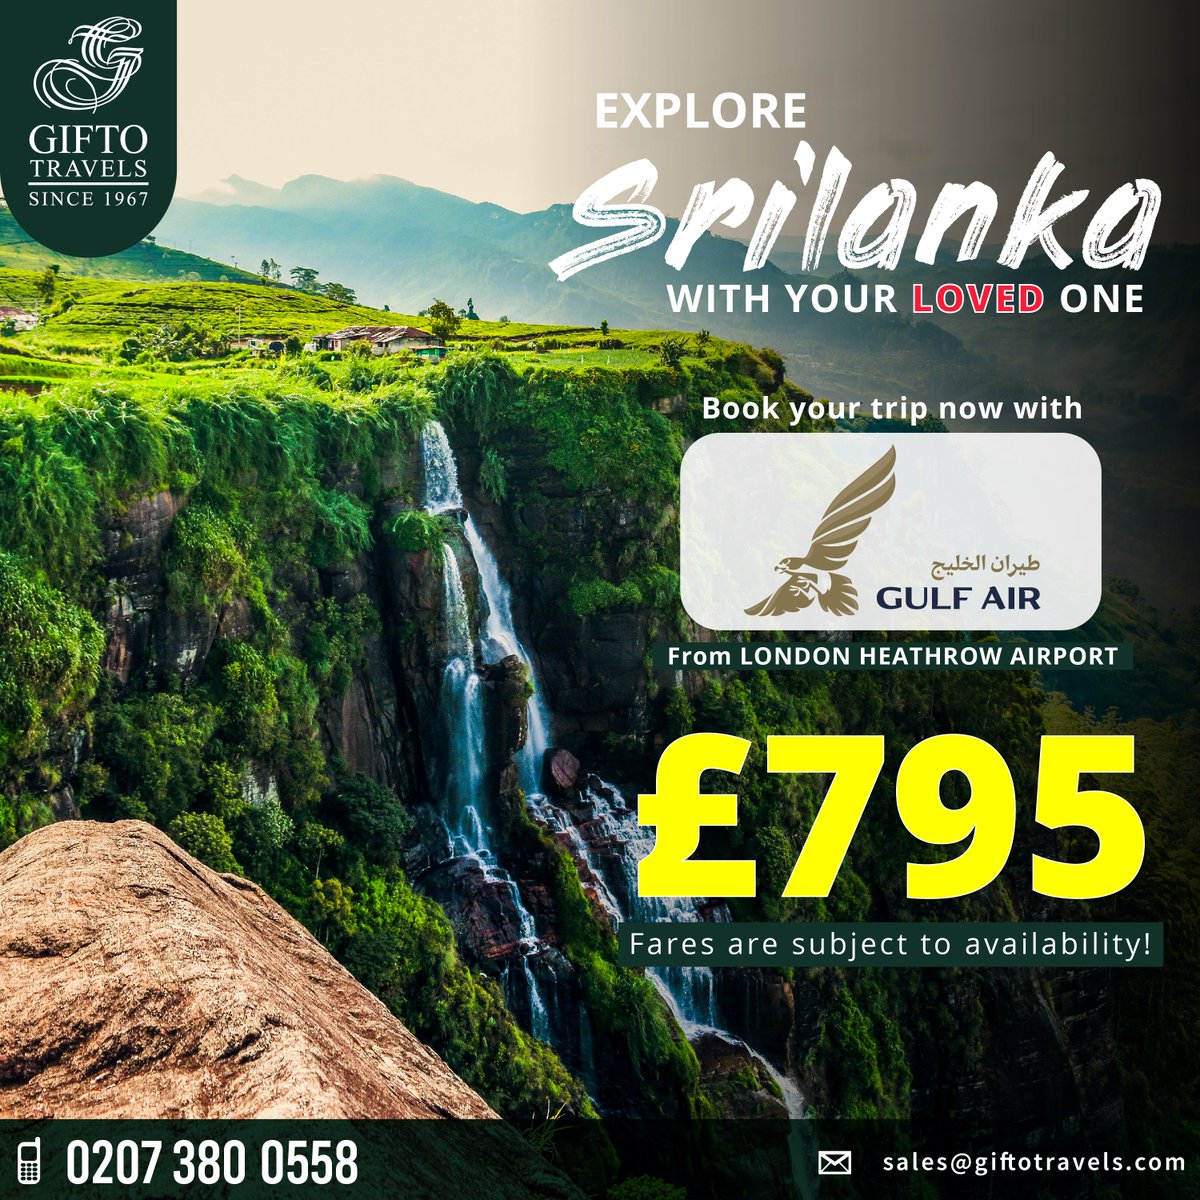 ✈️ Are you looking to explore #SriLanka with your loved one? 🤔

Book your flights now with Gifto Travels in just £795! 😍😍😍

#giftotravelslimited #giftotravelsuk #exploresrilanka #traveltosrilanka #cheaptickets #cheapflights #besttraveldestinations #travel #frequenttraveler